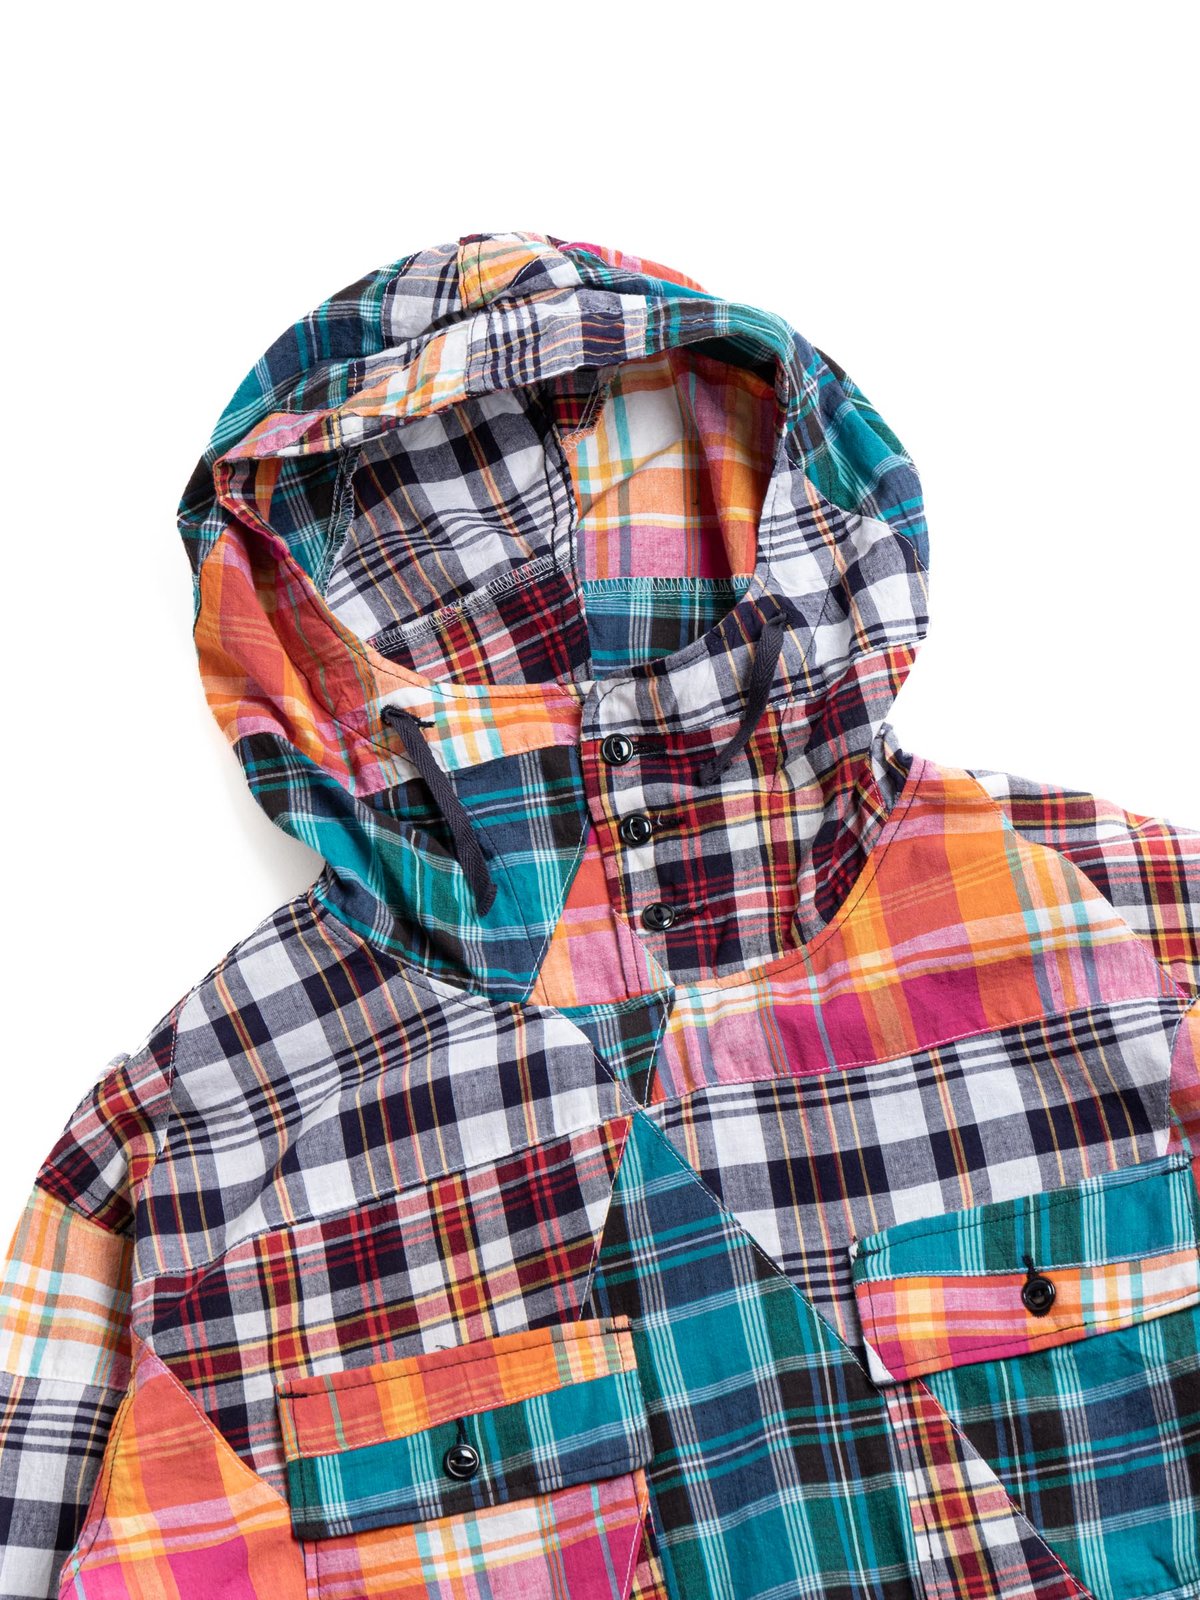 CAGOULE SHIRT MULTI COLOR TRIANGLE PATCHWORK - Image 3